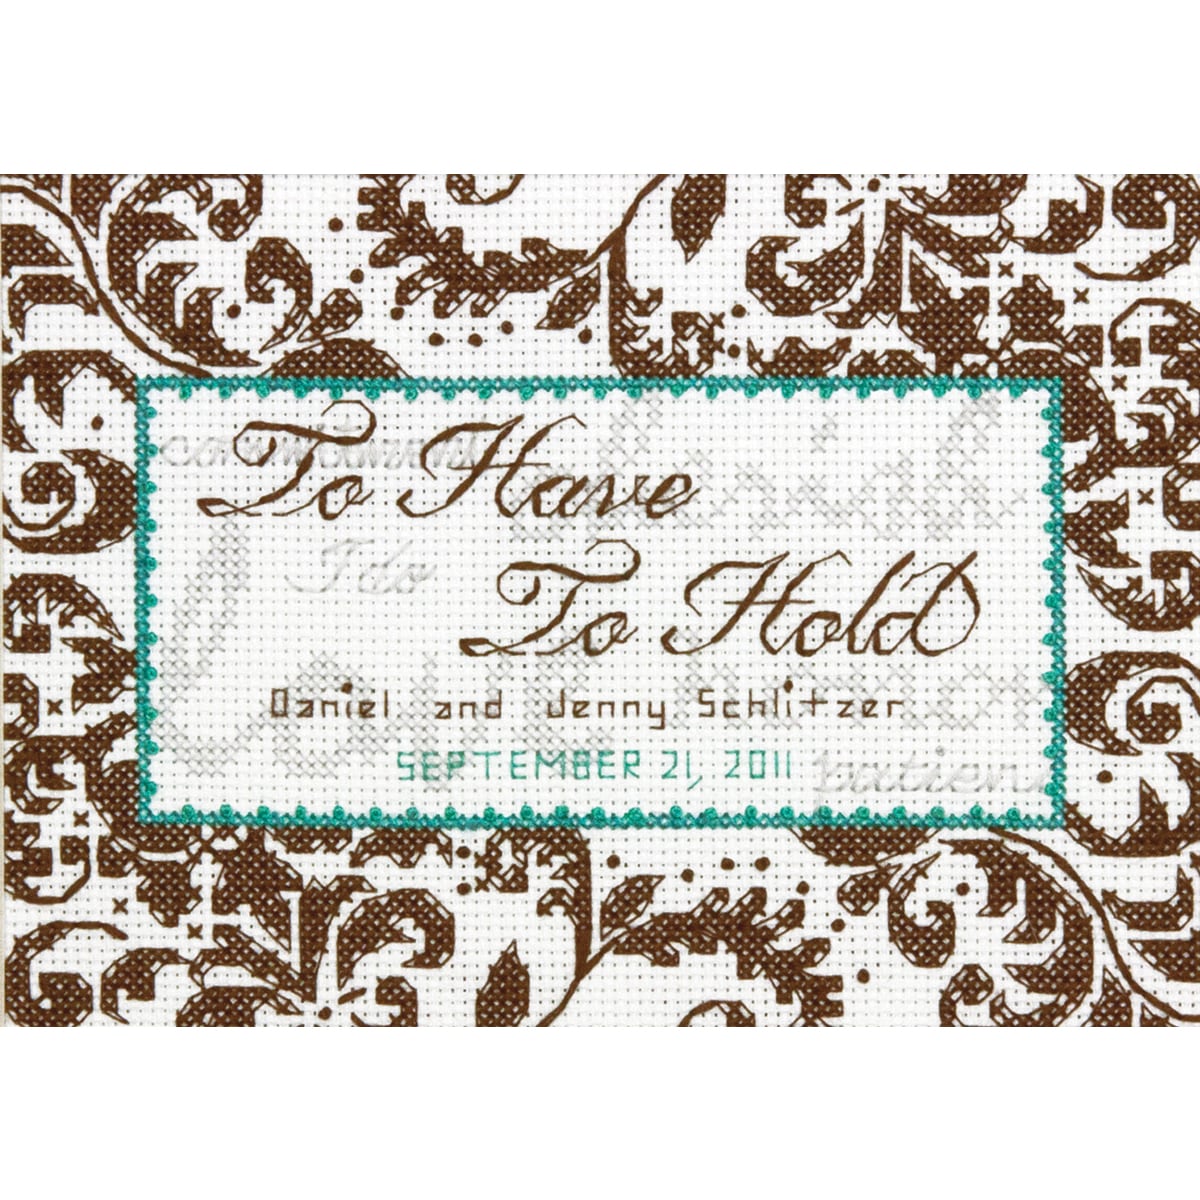 Dimensions Treasured Words Wedding Record Counted Cross Stitch Kit, 7" x 5", 14-Count - image 2 of 2